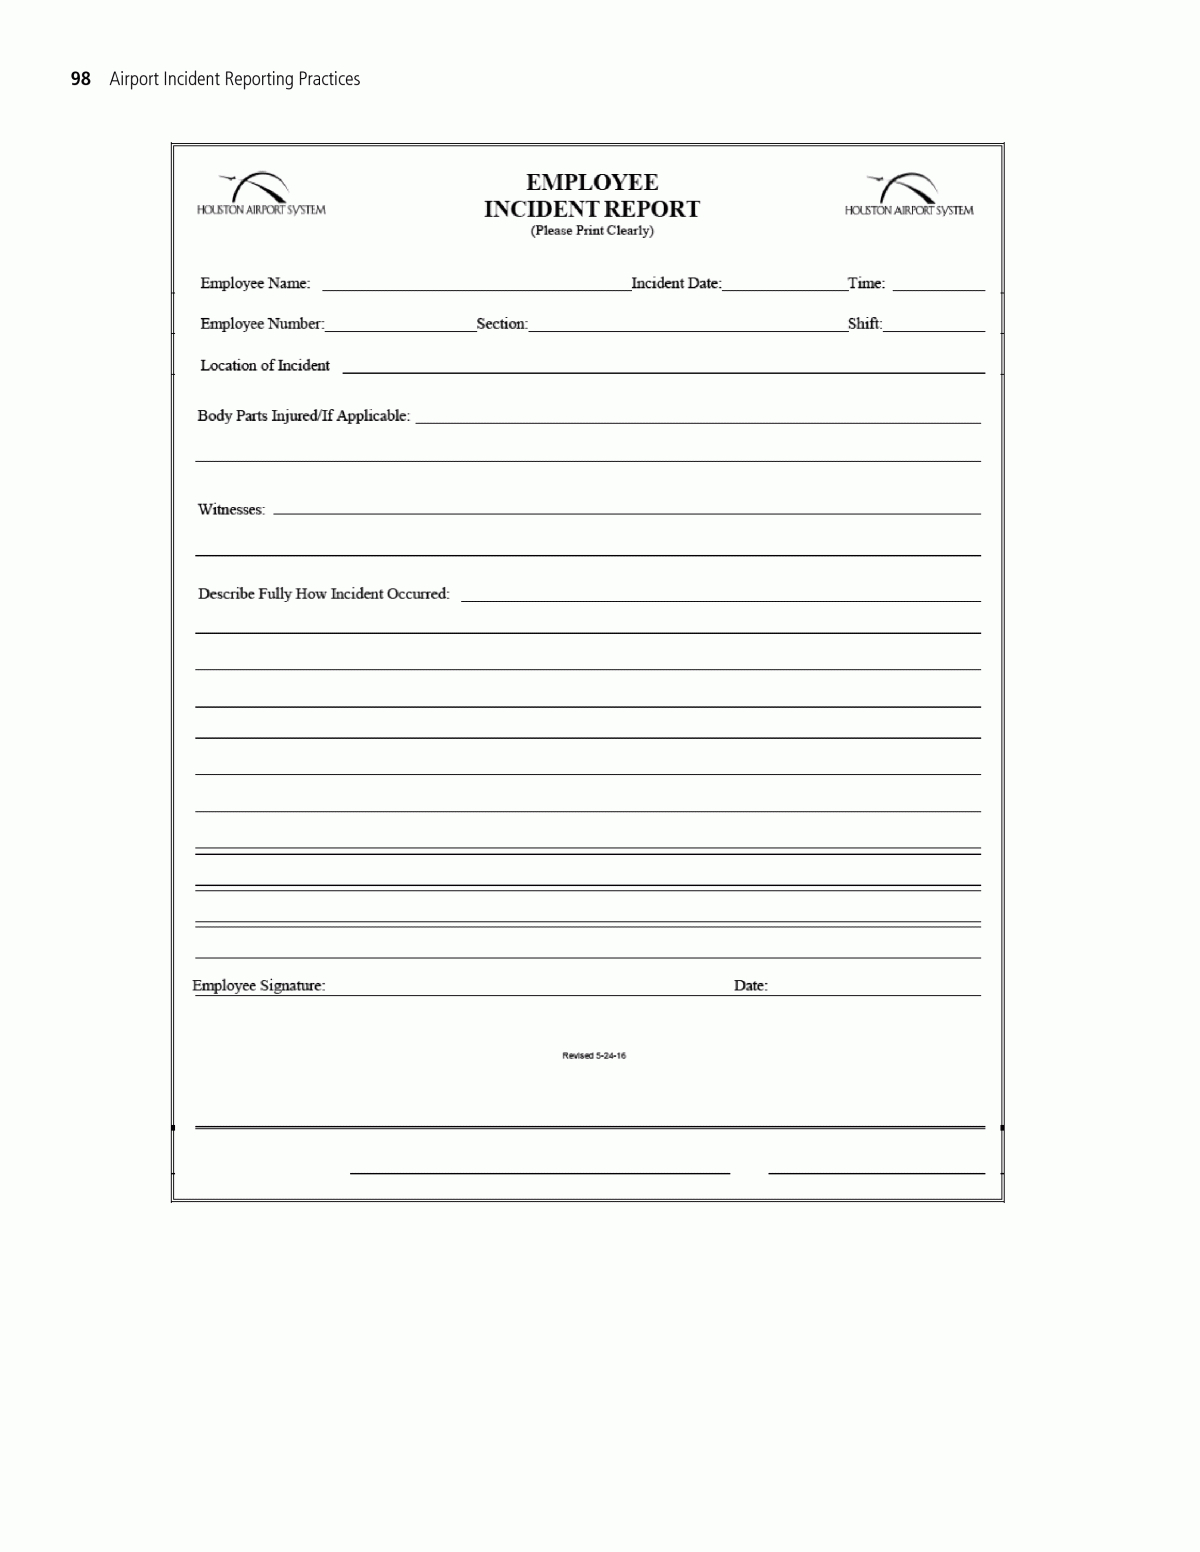 Appendix H - Sample Employee Incident Report Form | Airport Throughout Customer Incident Report Form Template